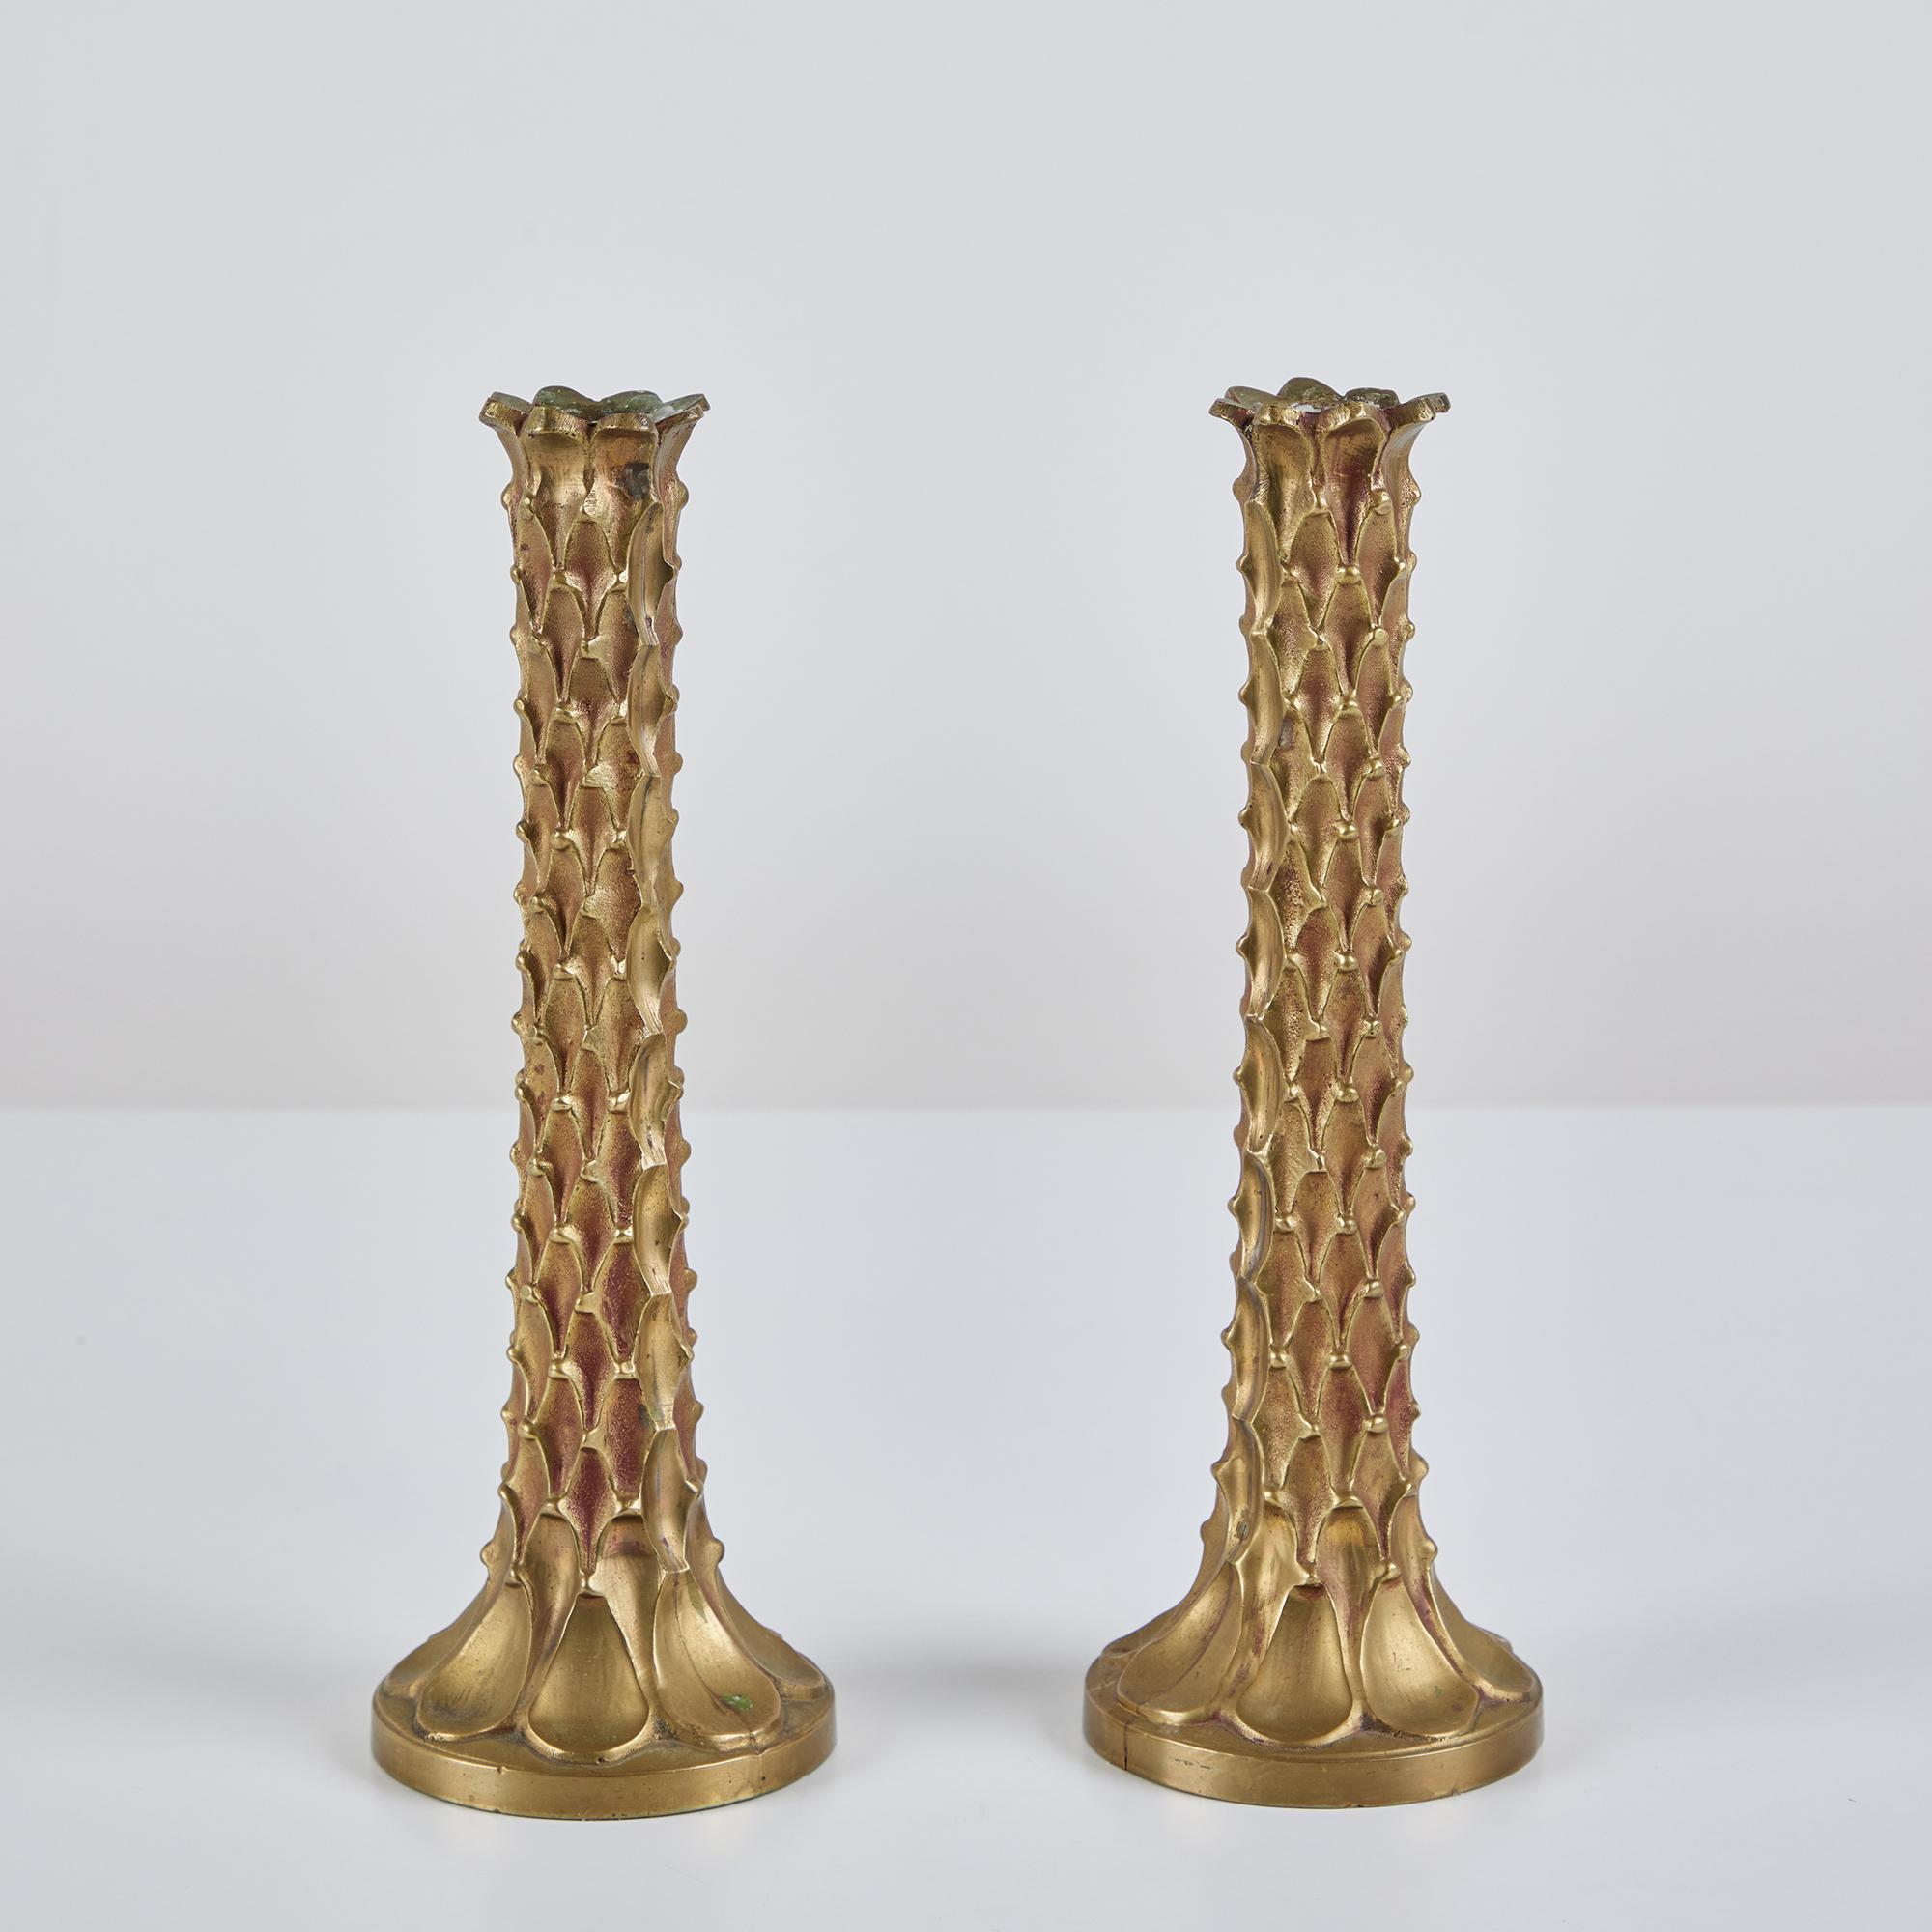 Pair of solid brass candlesticks. The pair of beautifully patinated candlesticks feature palm tree like textured stems, and round bases.

Dimensions
3.5